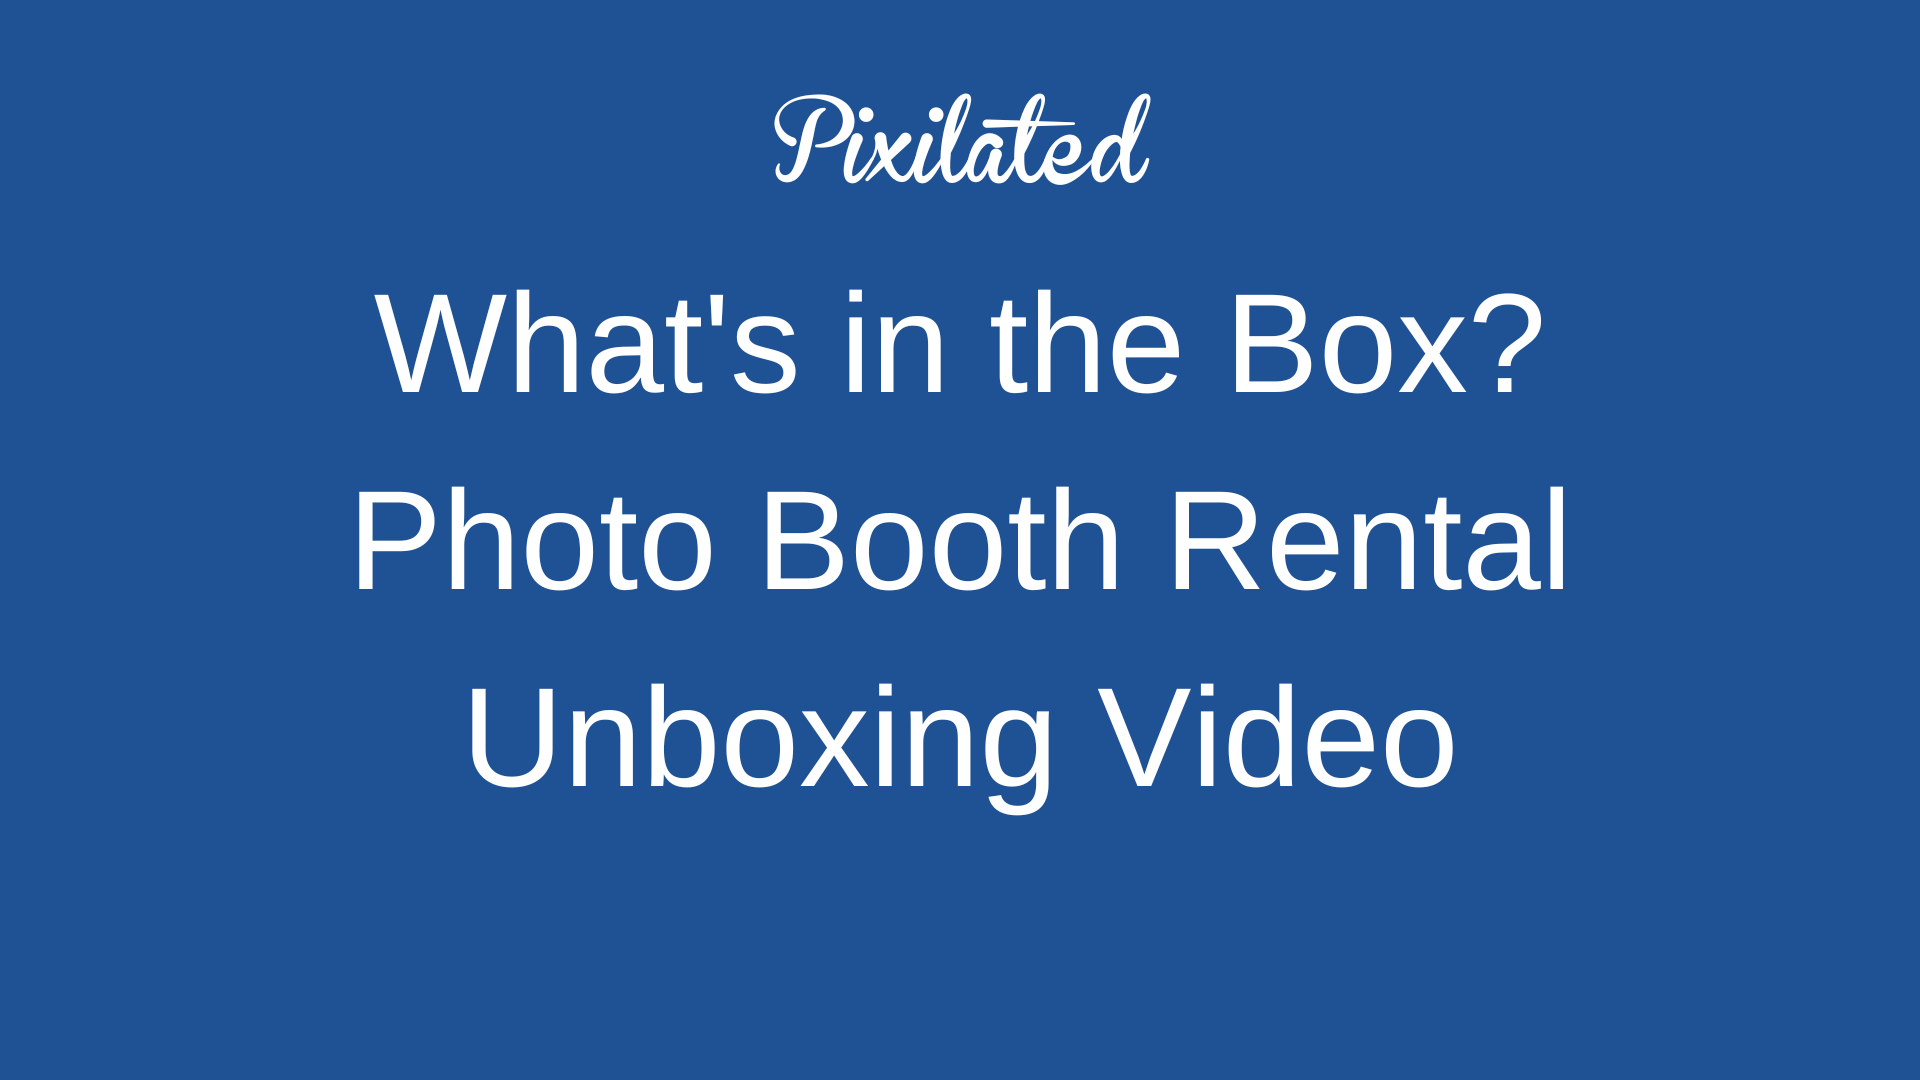 Load video: Photo Booth Rental Unboxing Video